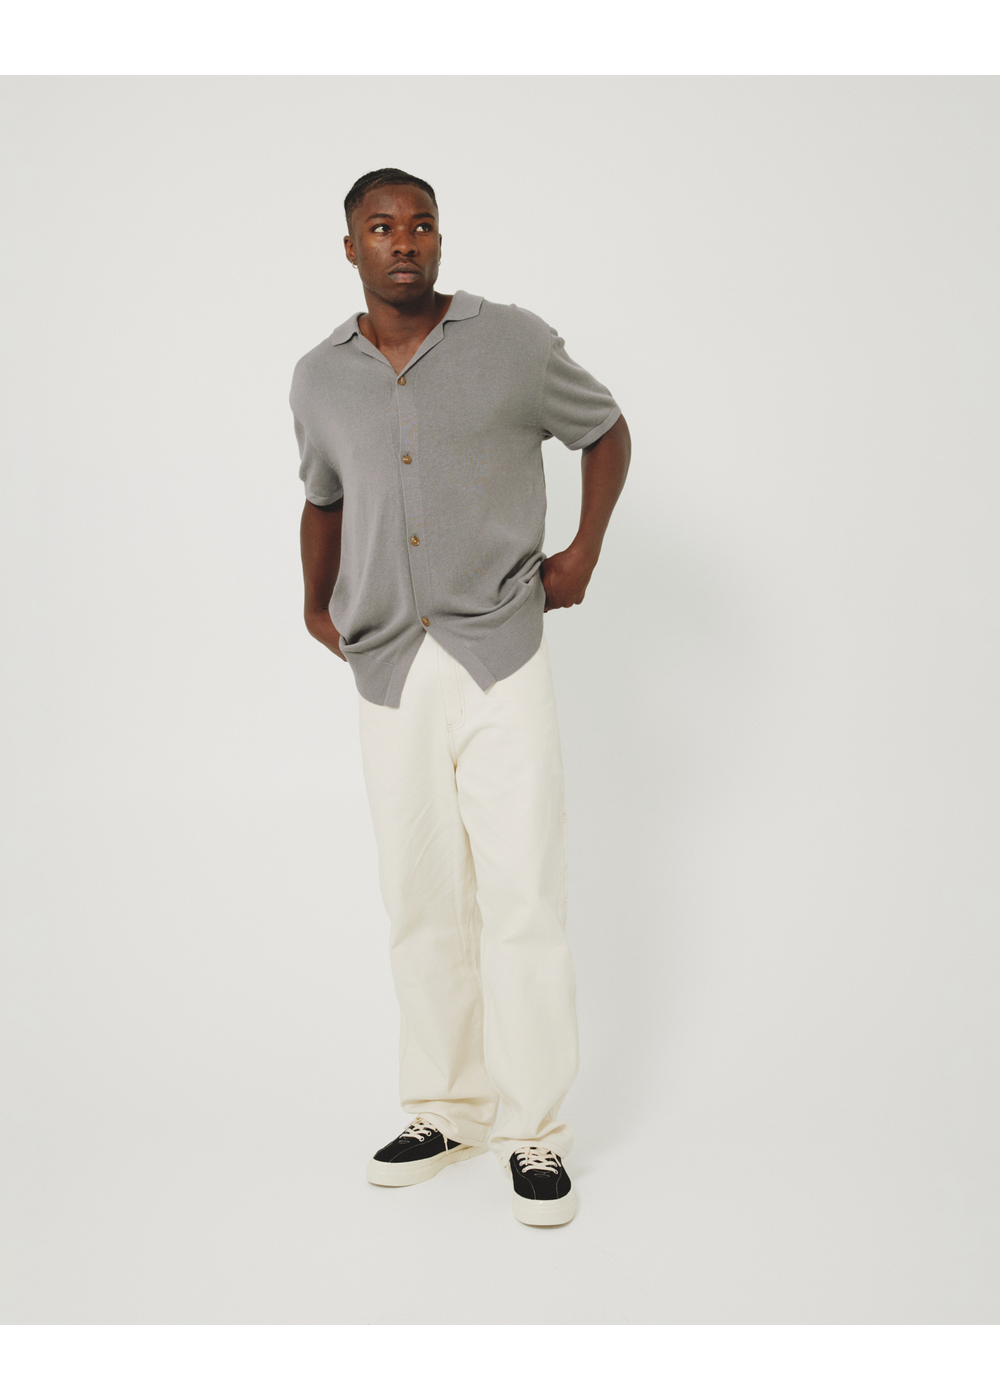 CAMPER KNIT SS SHIRT / ASH | Kore Studios | Mad About The Boy